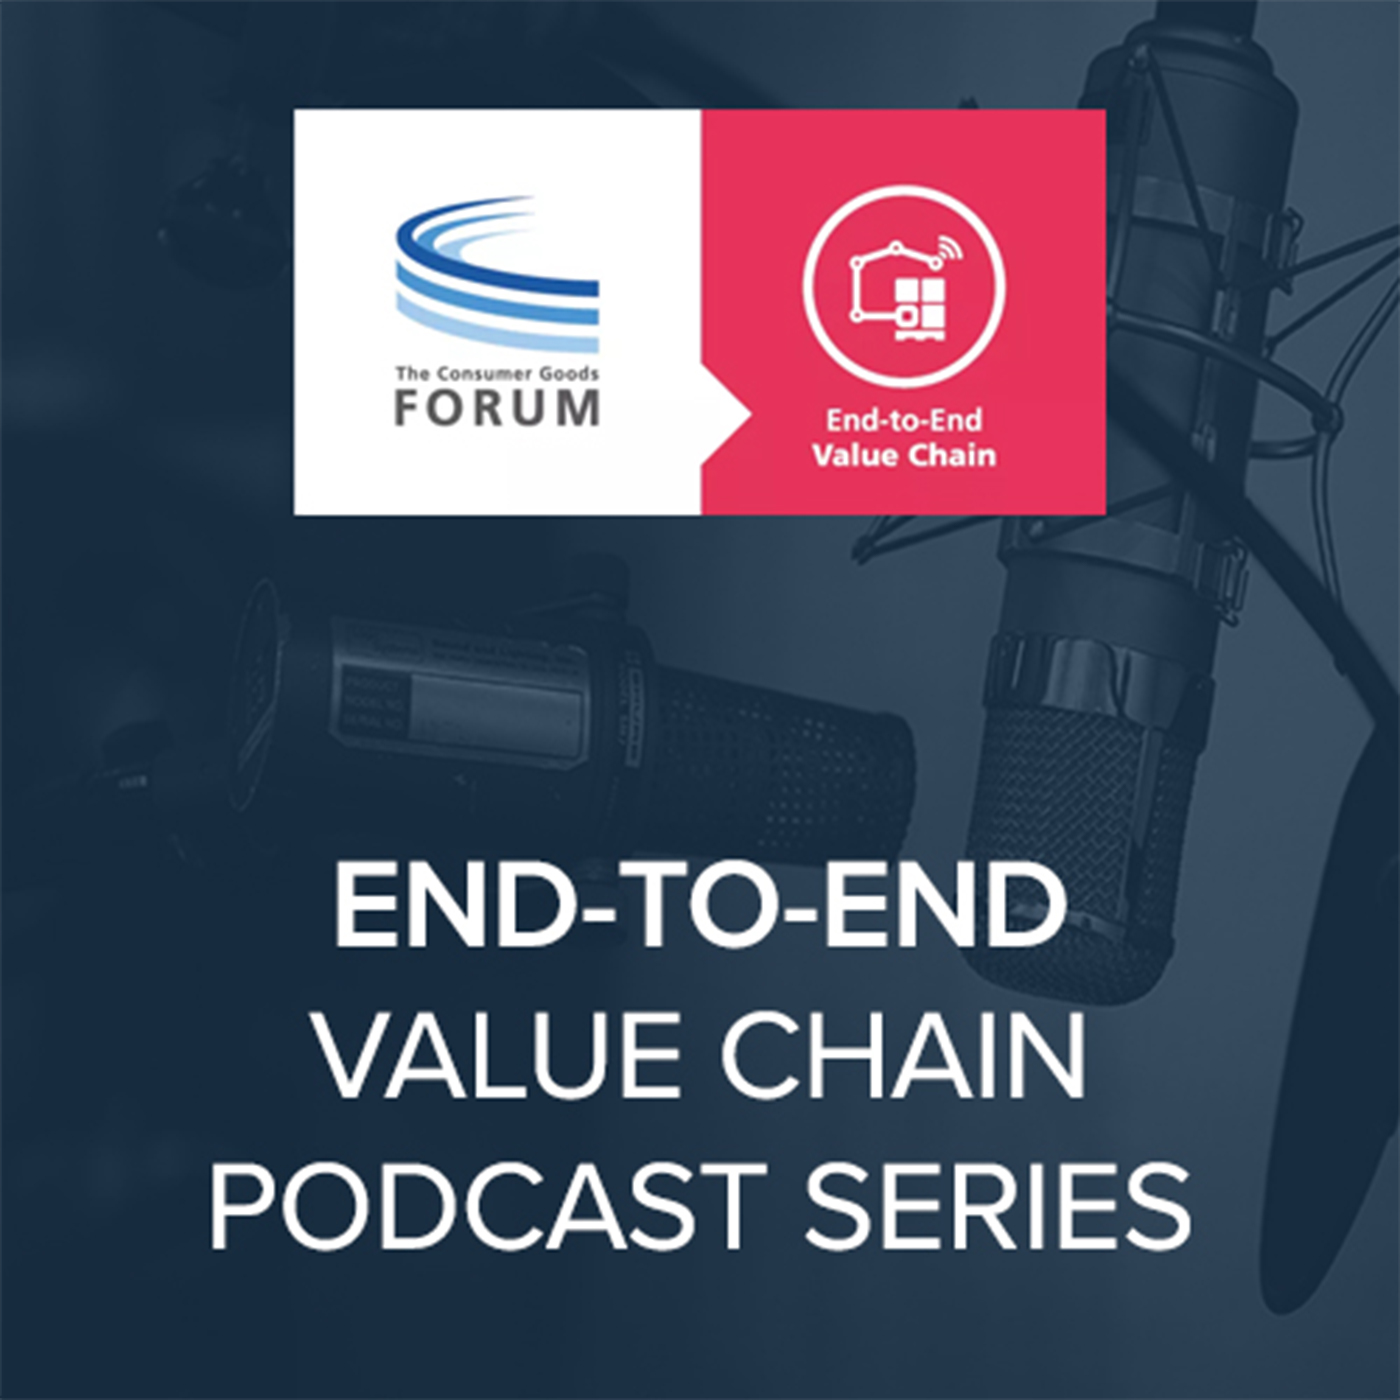 End-to-End Value Chain Podcast